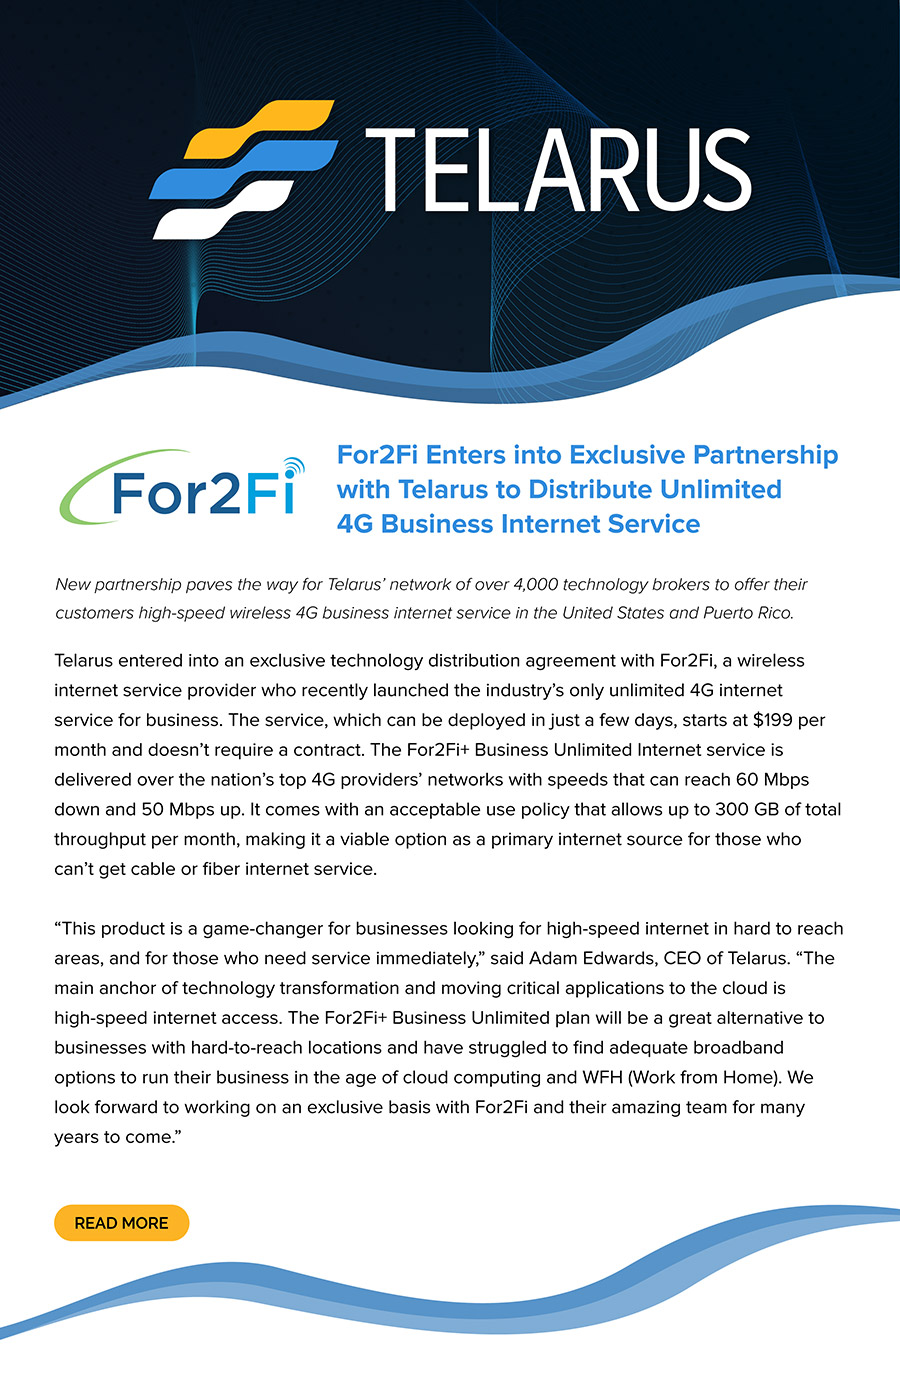 FOR2FI Enters into Exclusive Partnership with Telarus